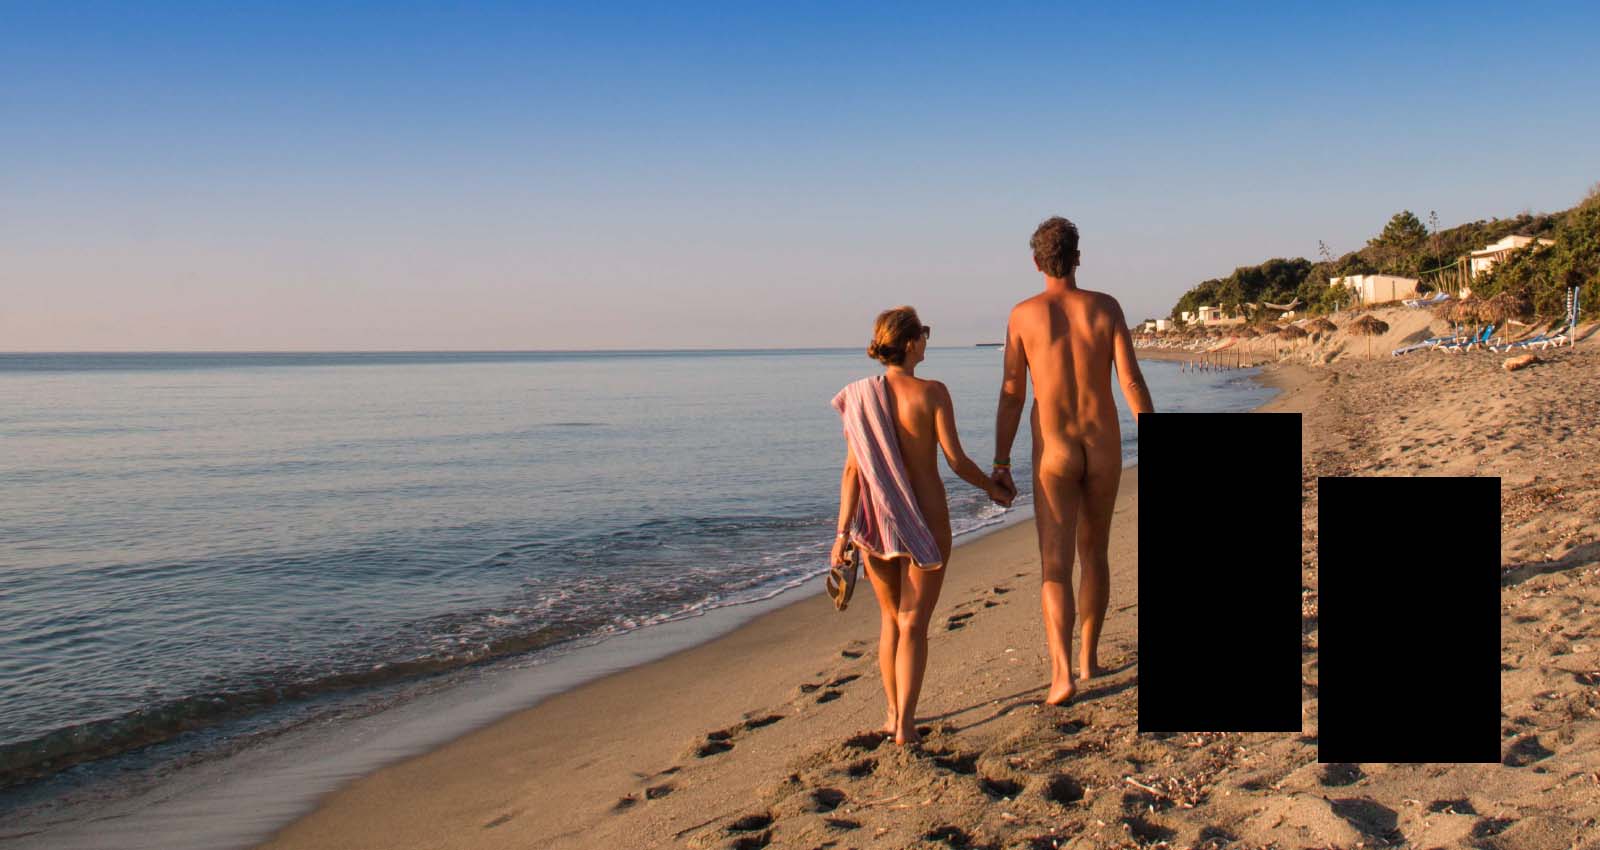 Where did Google hide family naturism?